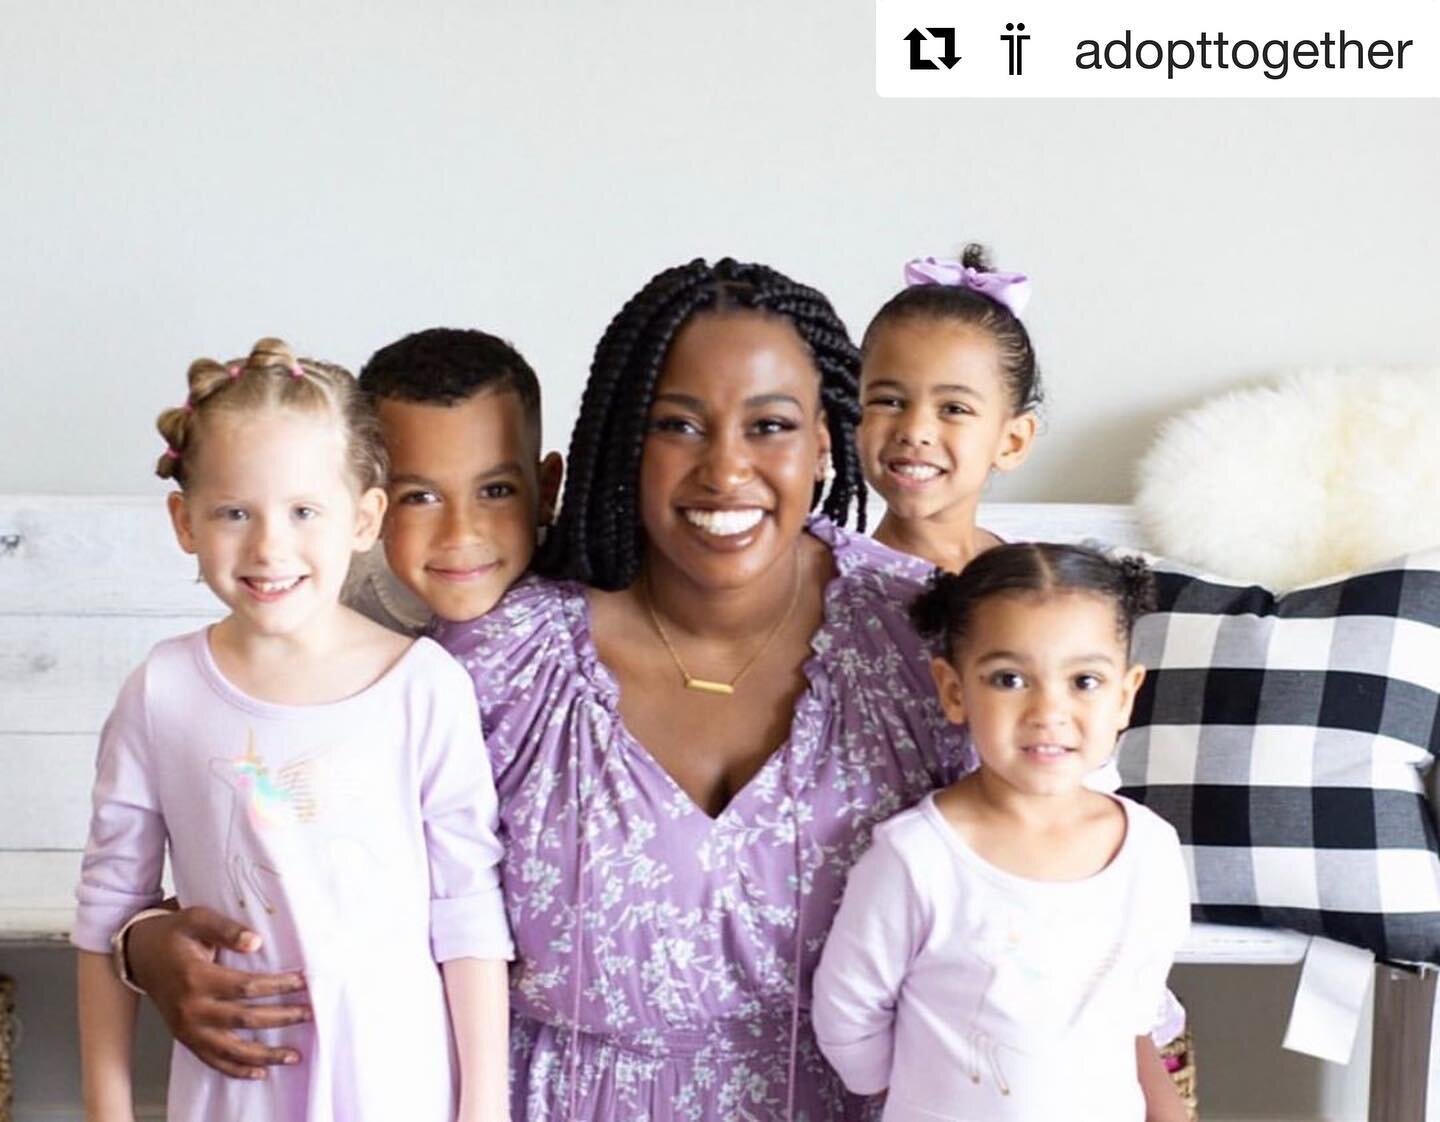 The national ALL IN Adoption challenge is monumental in breaking the cycle of poverty and abuse. Look at this heart melting family! Highest of fives to you, ma&rsquo;am for being a mother who chose the highest of callings. All your children are beaut